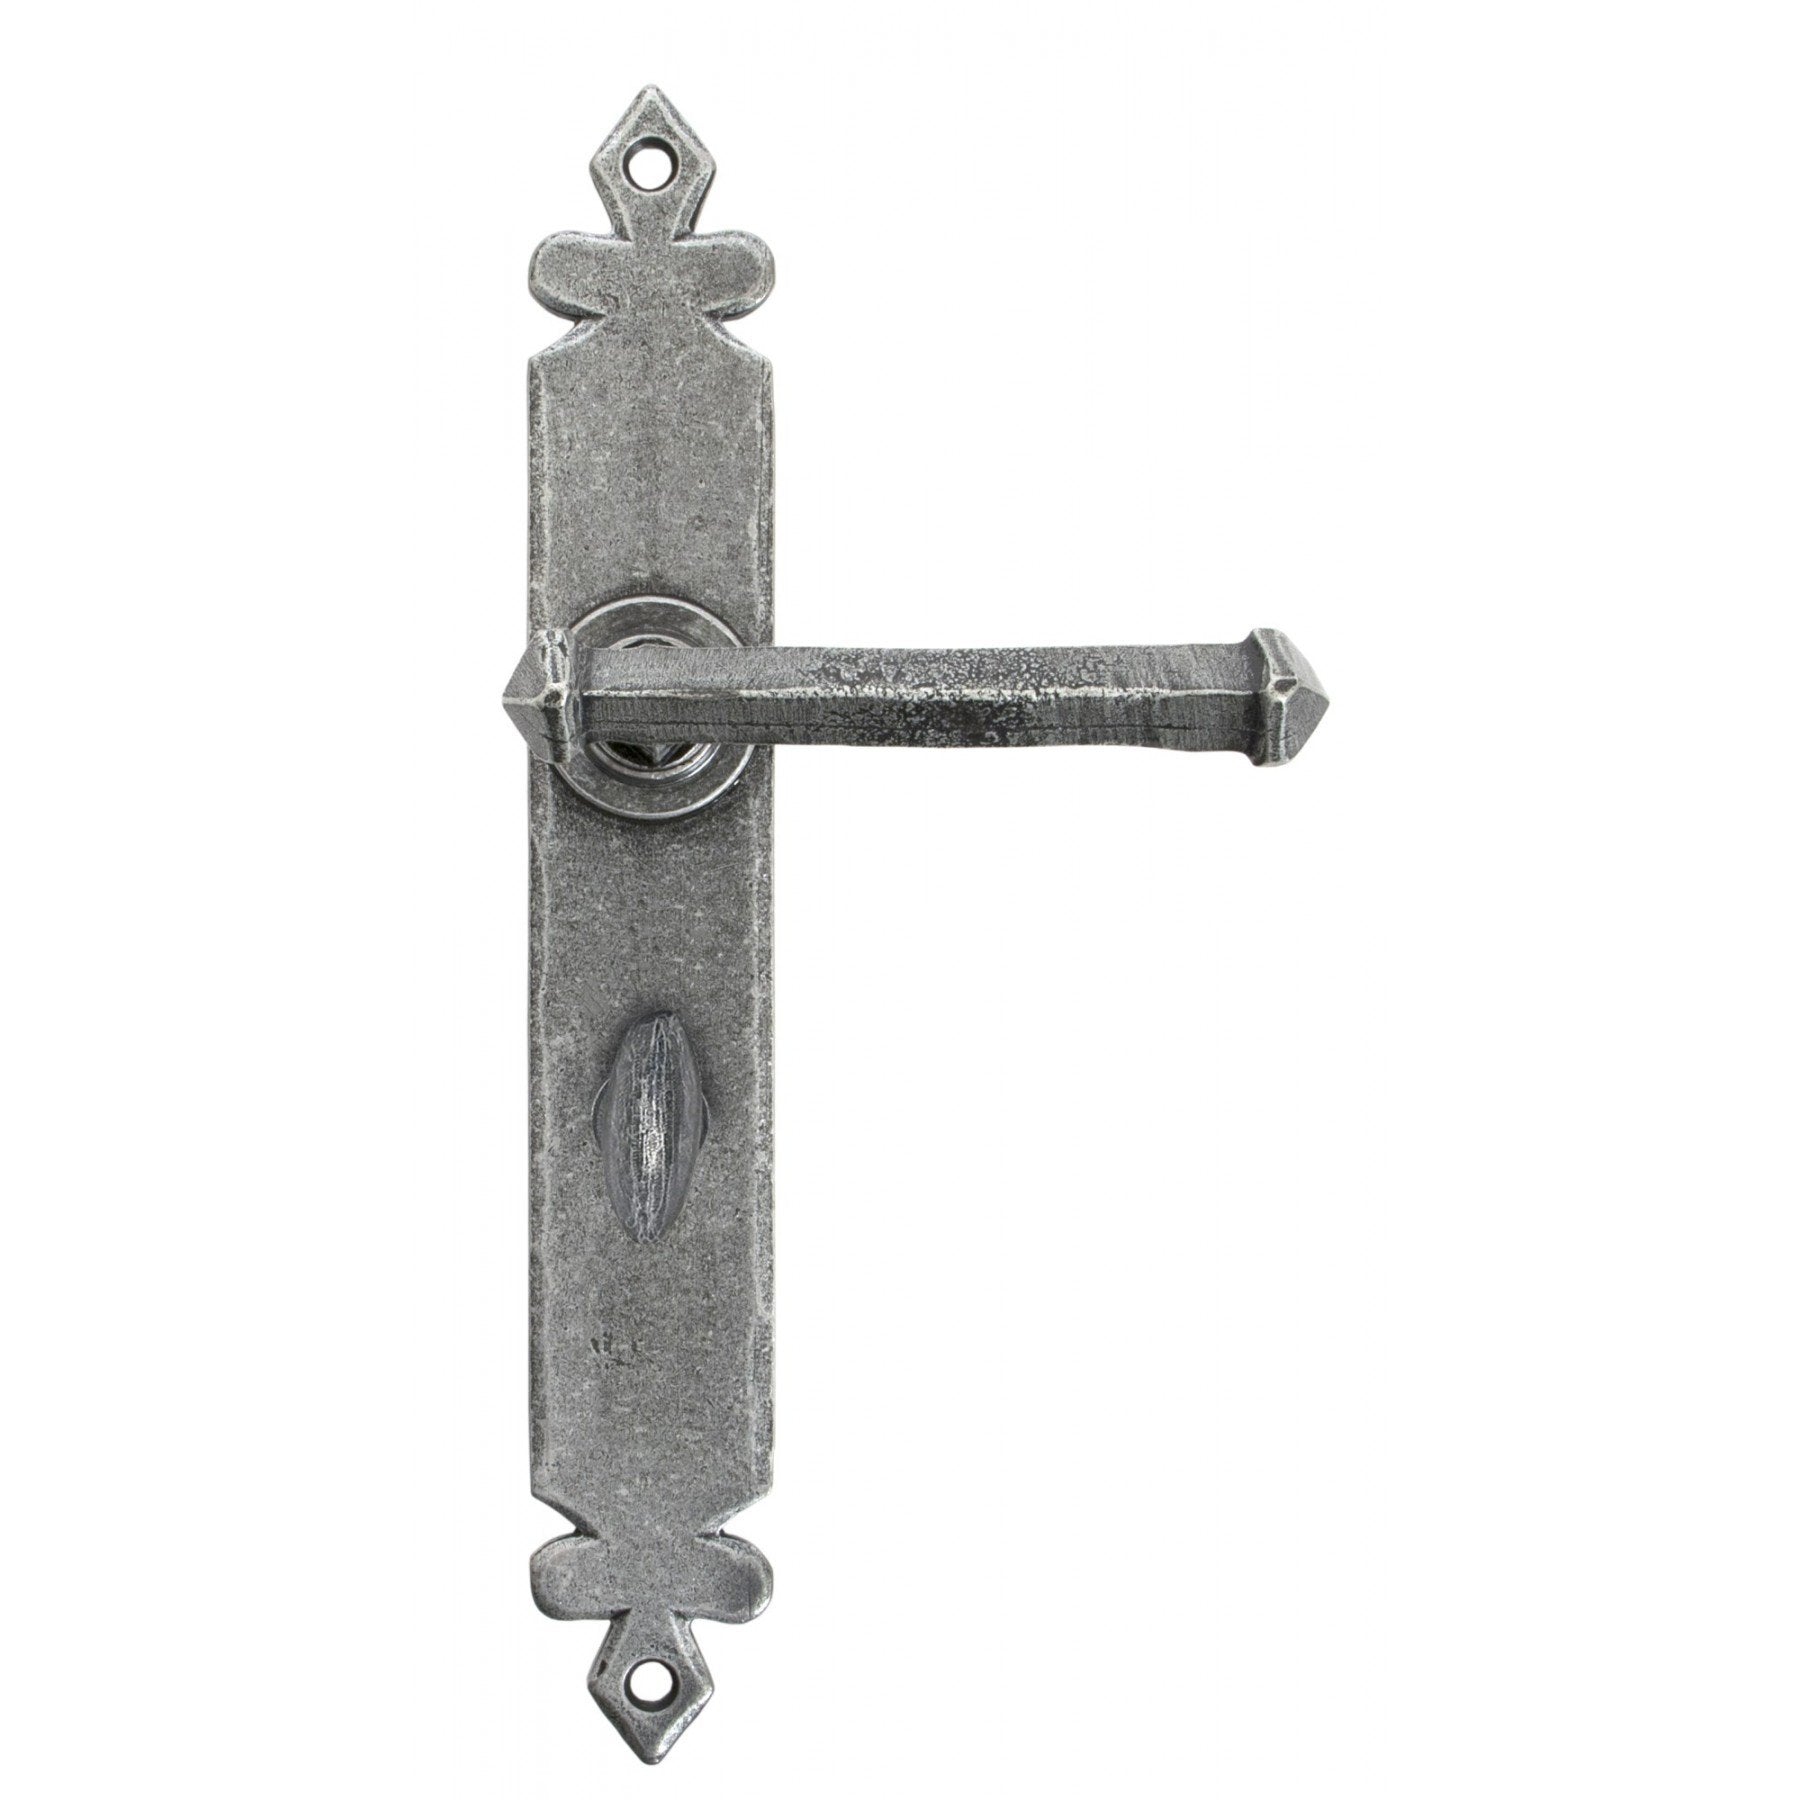 From the Anvil Pewter Tudor Lever Bathroom Set